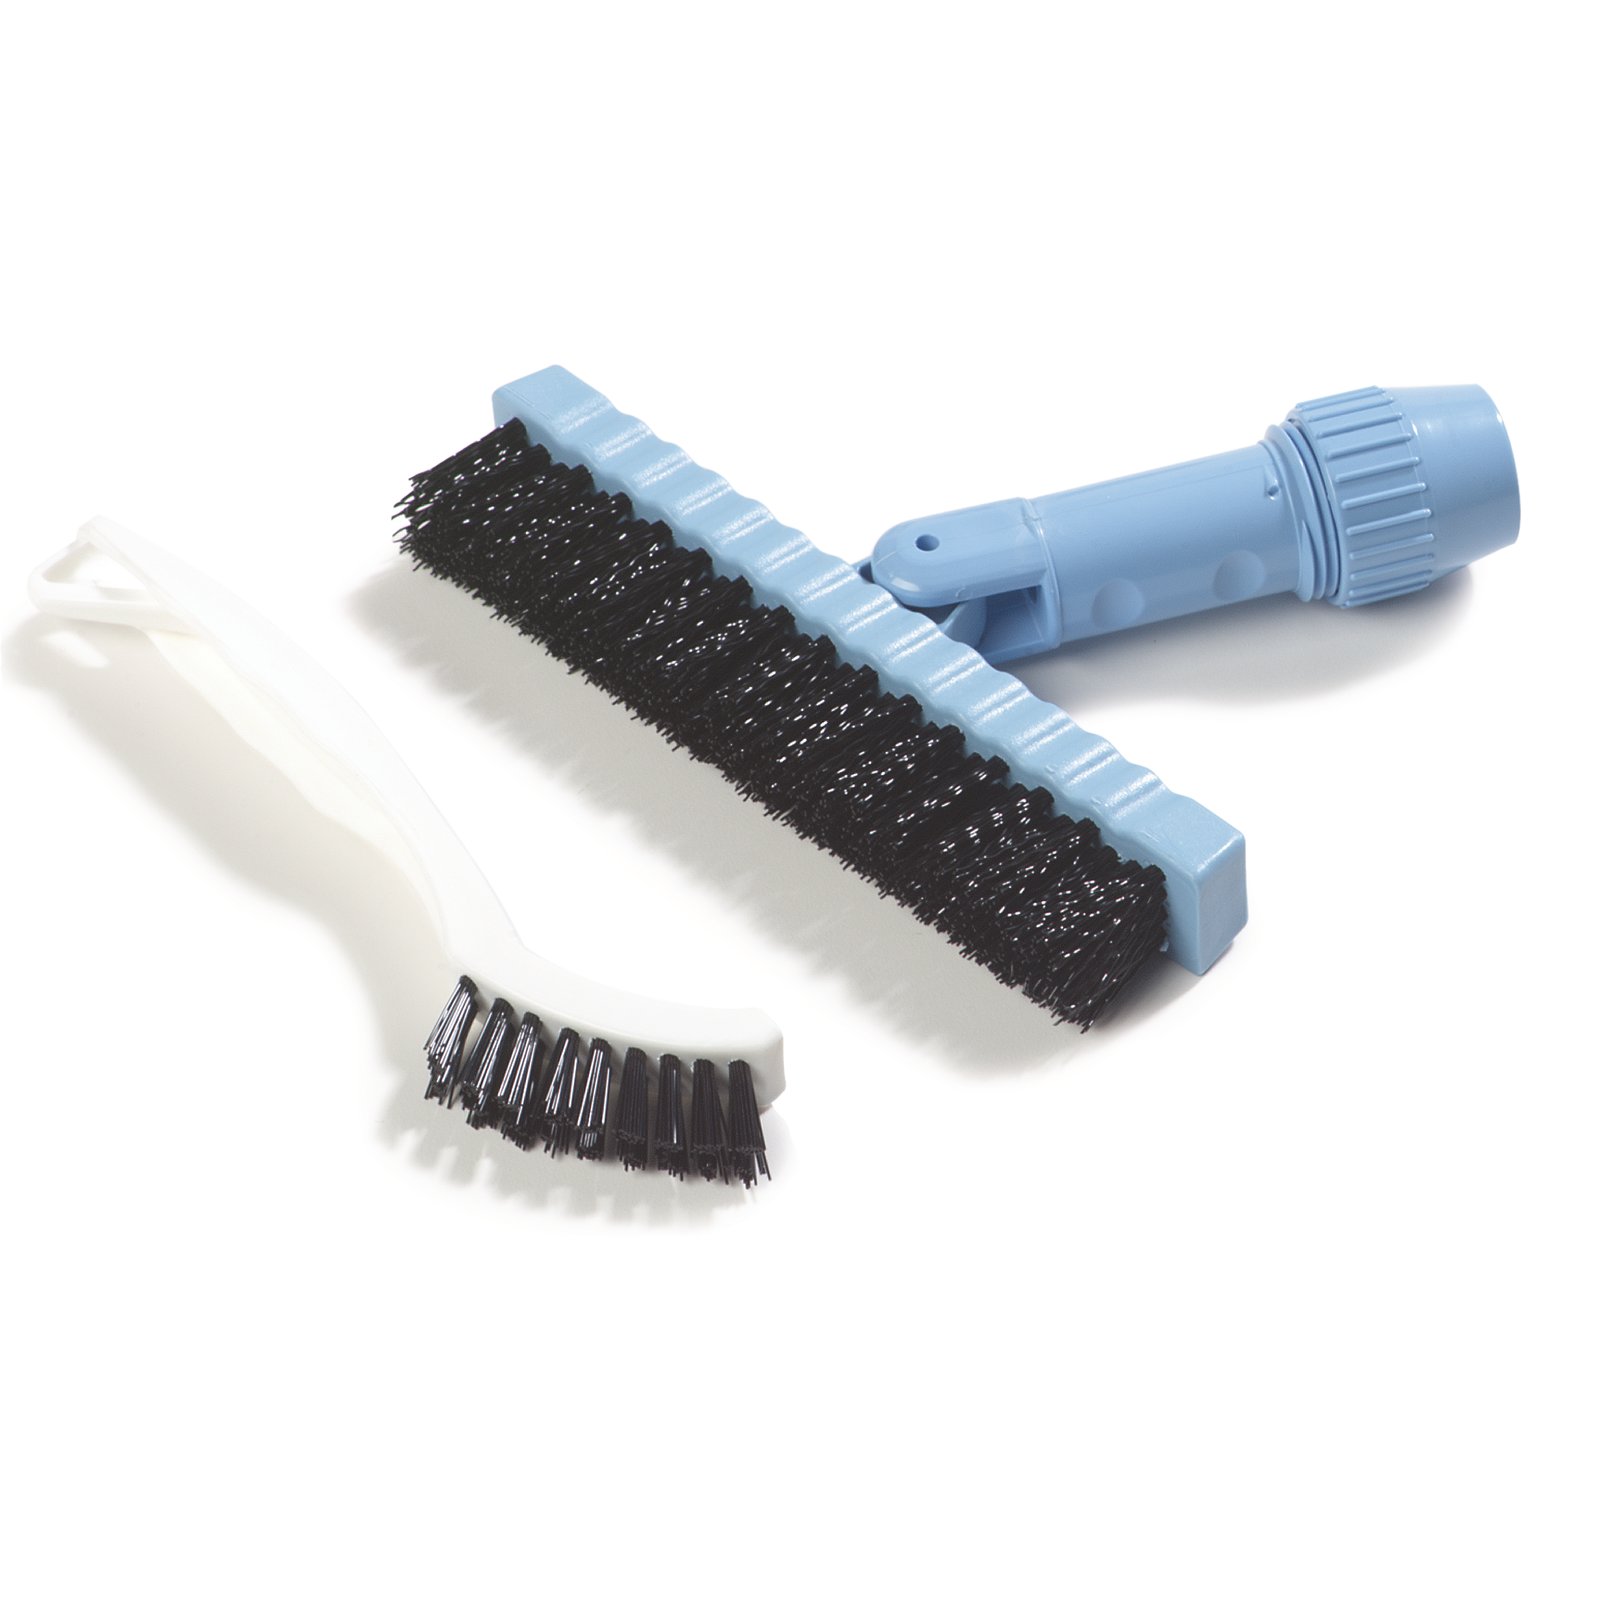 RCP 9B56 BLA - $5.20 - Synthetic-Fill Tile Grout Brush 8 1 2 Long